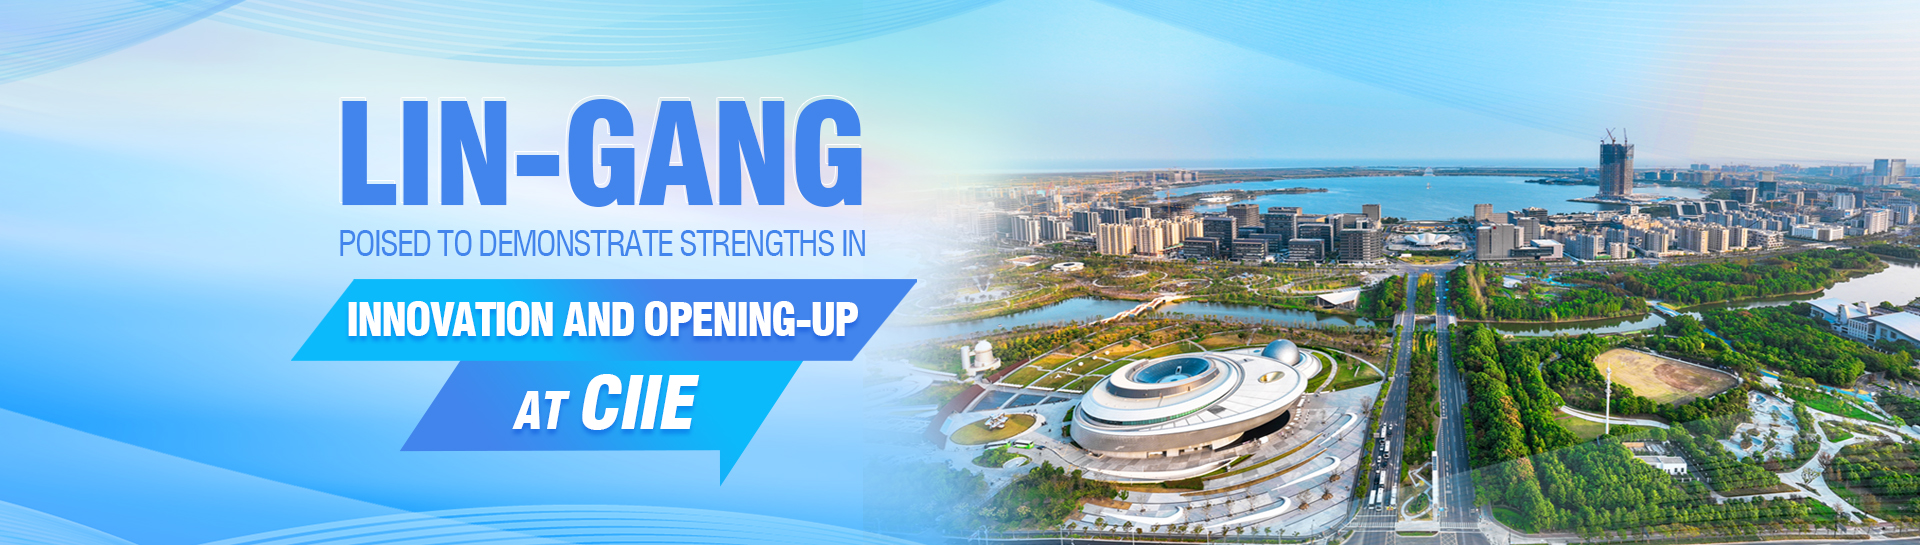 Lin-gang poised to demonstrate strengths in innovation and opening-up at CIIE